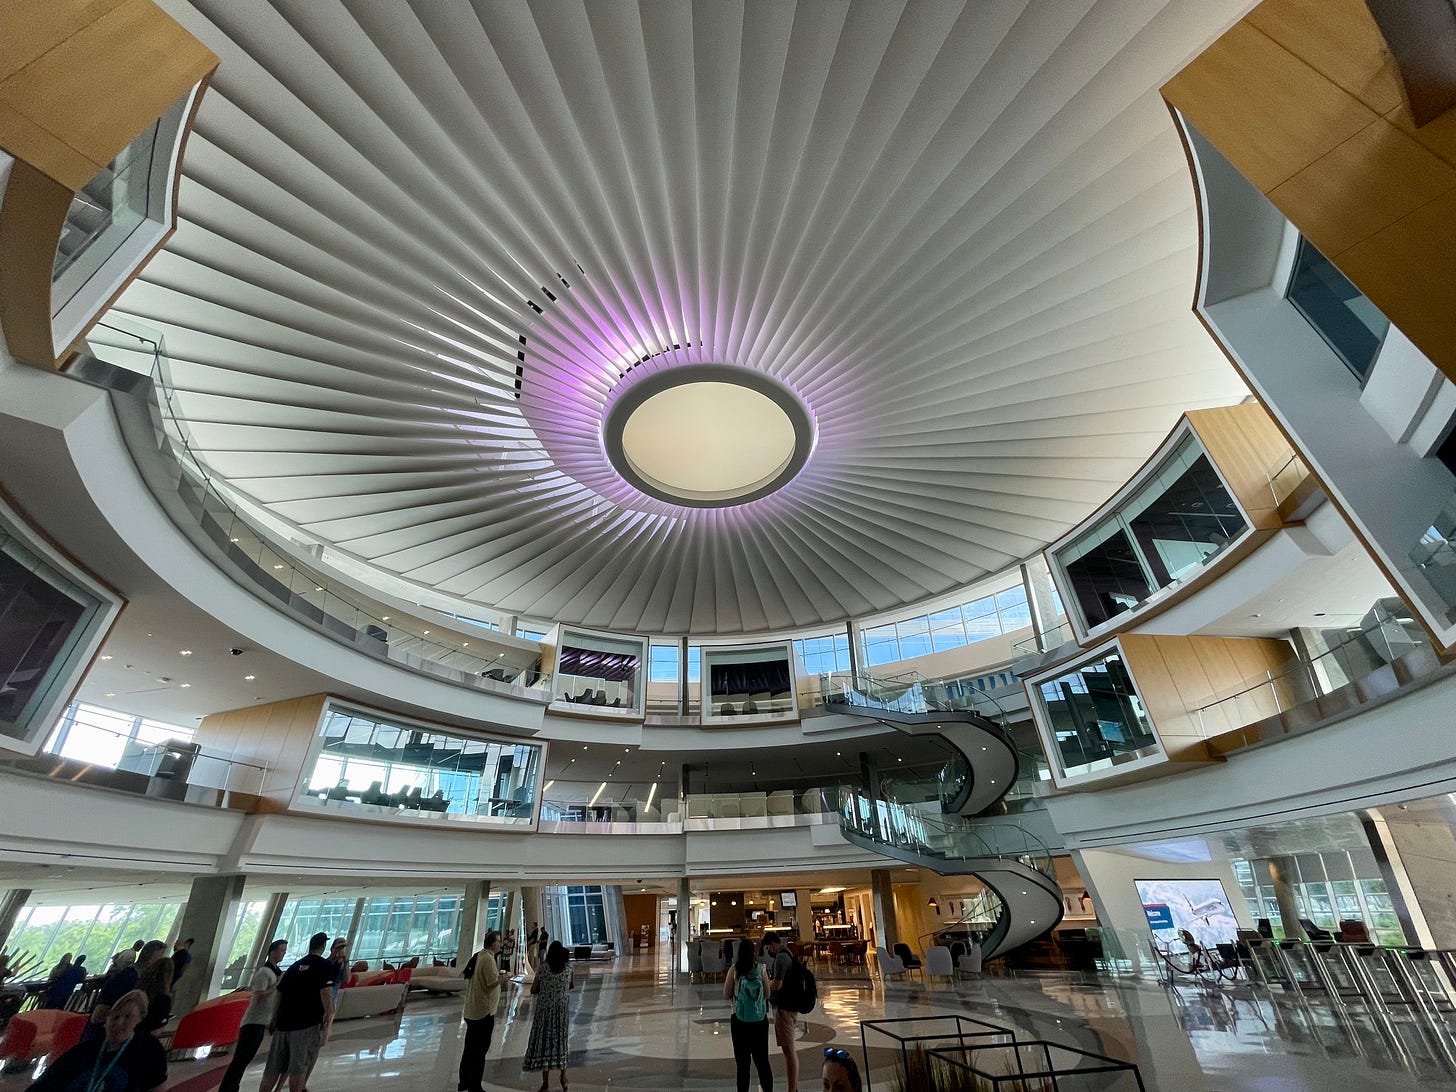 The main lobby in the Skyview 8 building with a jet-turbine-themed ceiling at the new American Airlines headquarters campus near DFW airport